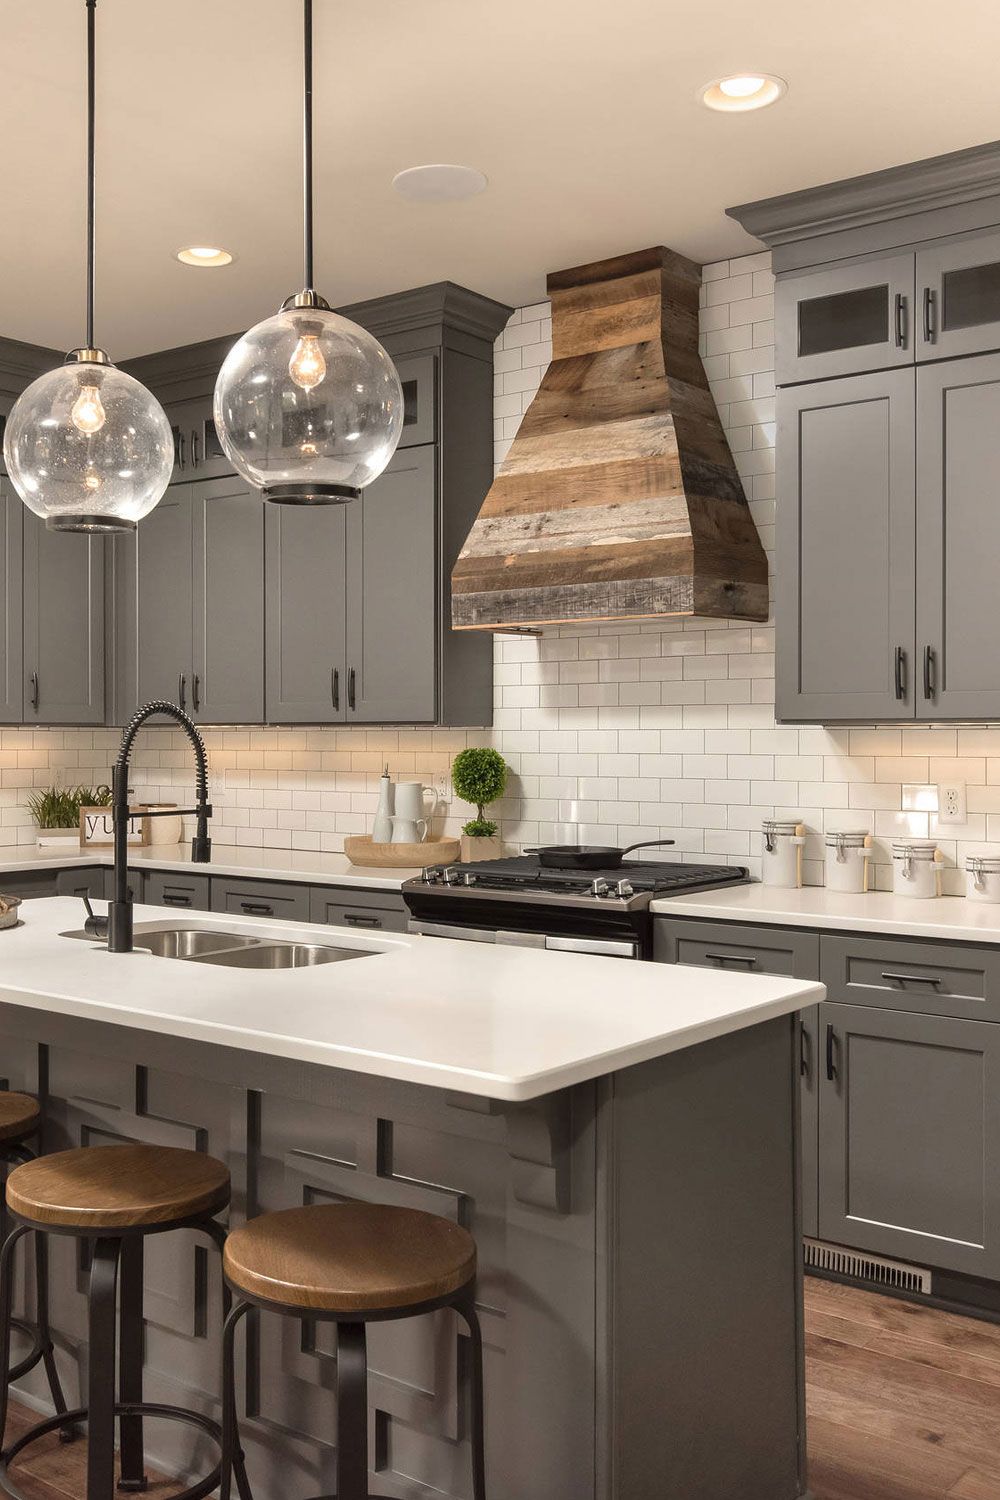 50 Shades of Gray: Stunning Kitchen Ideas
for a Sophisticated Space